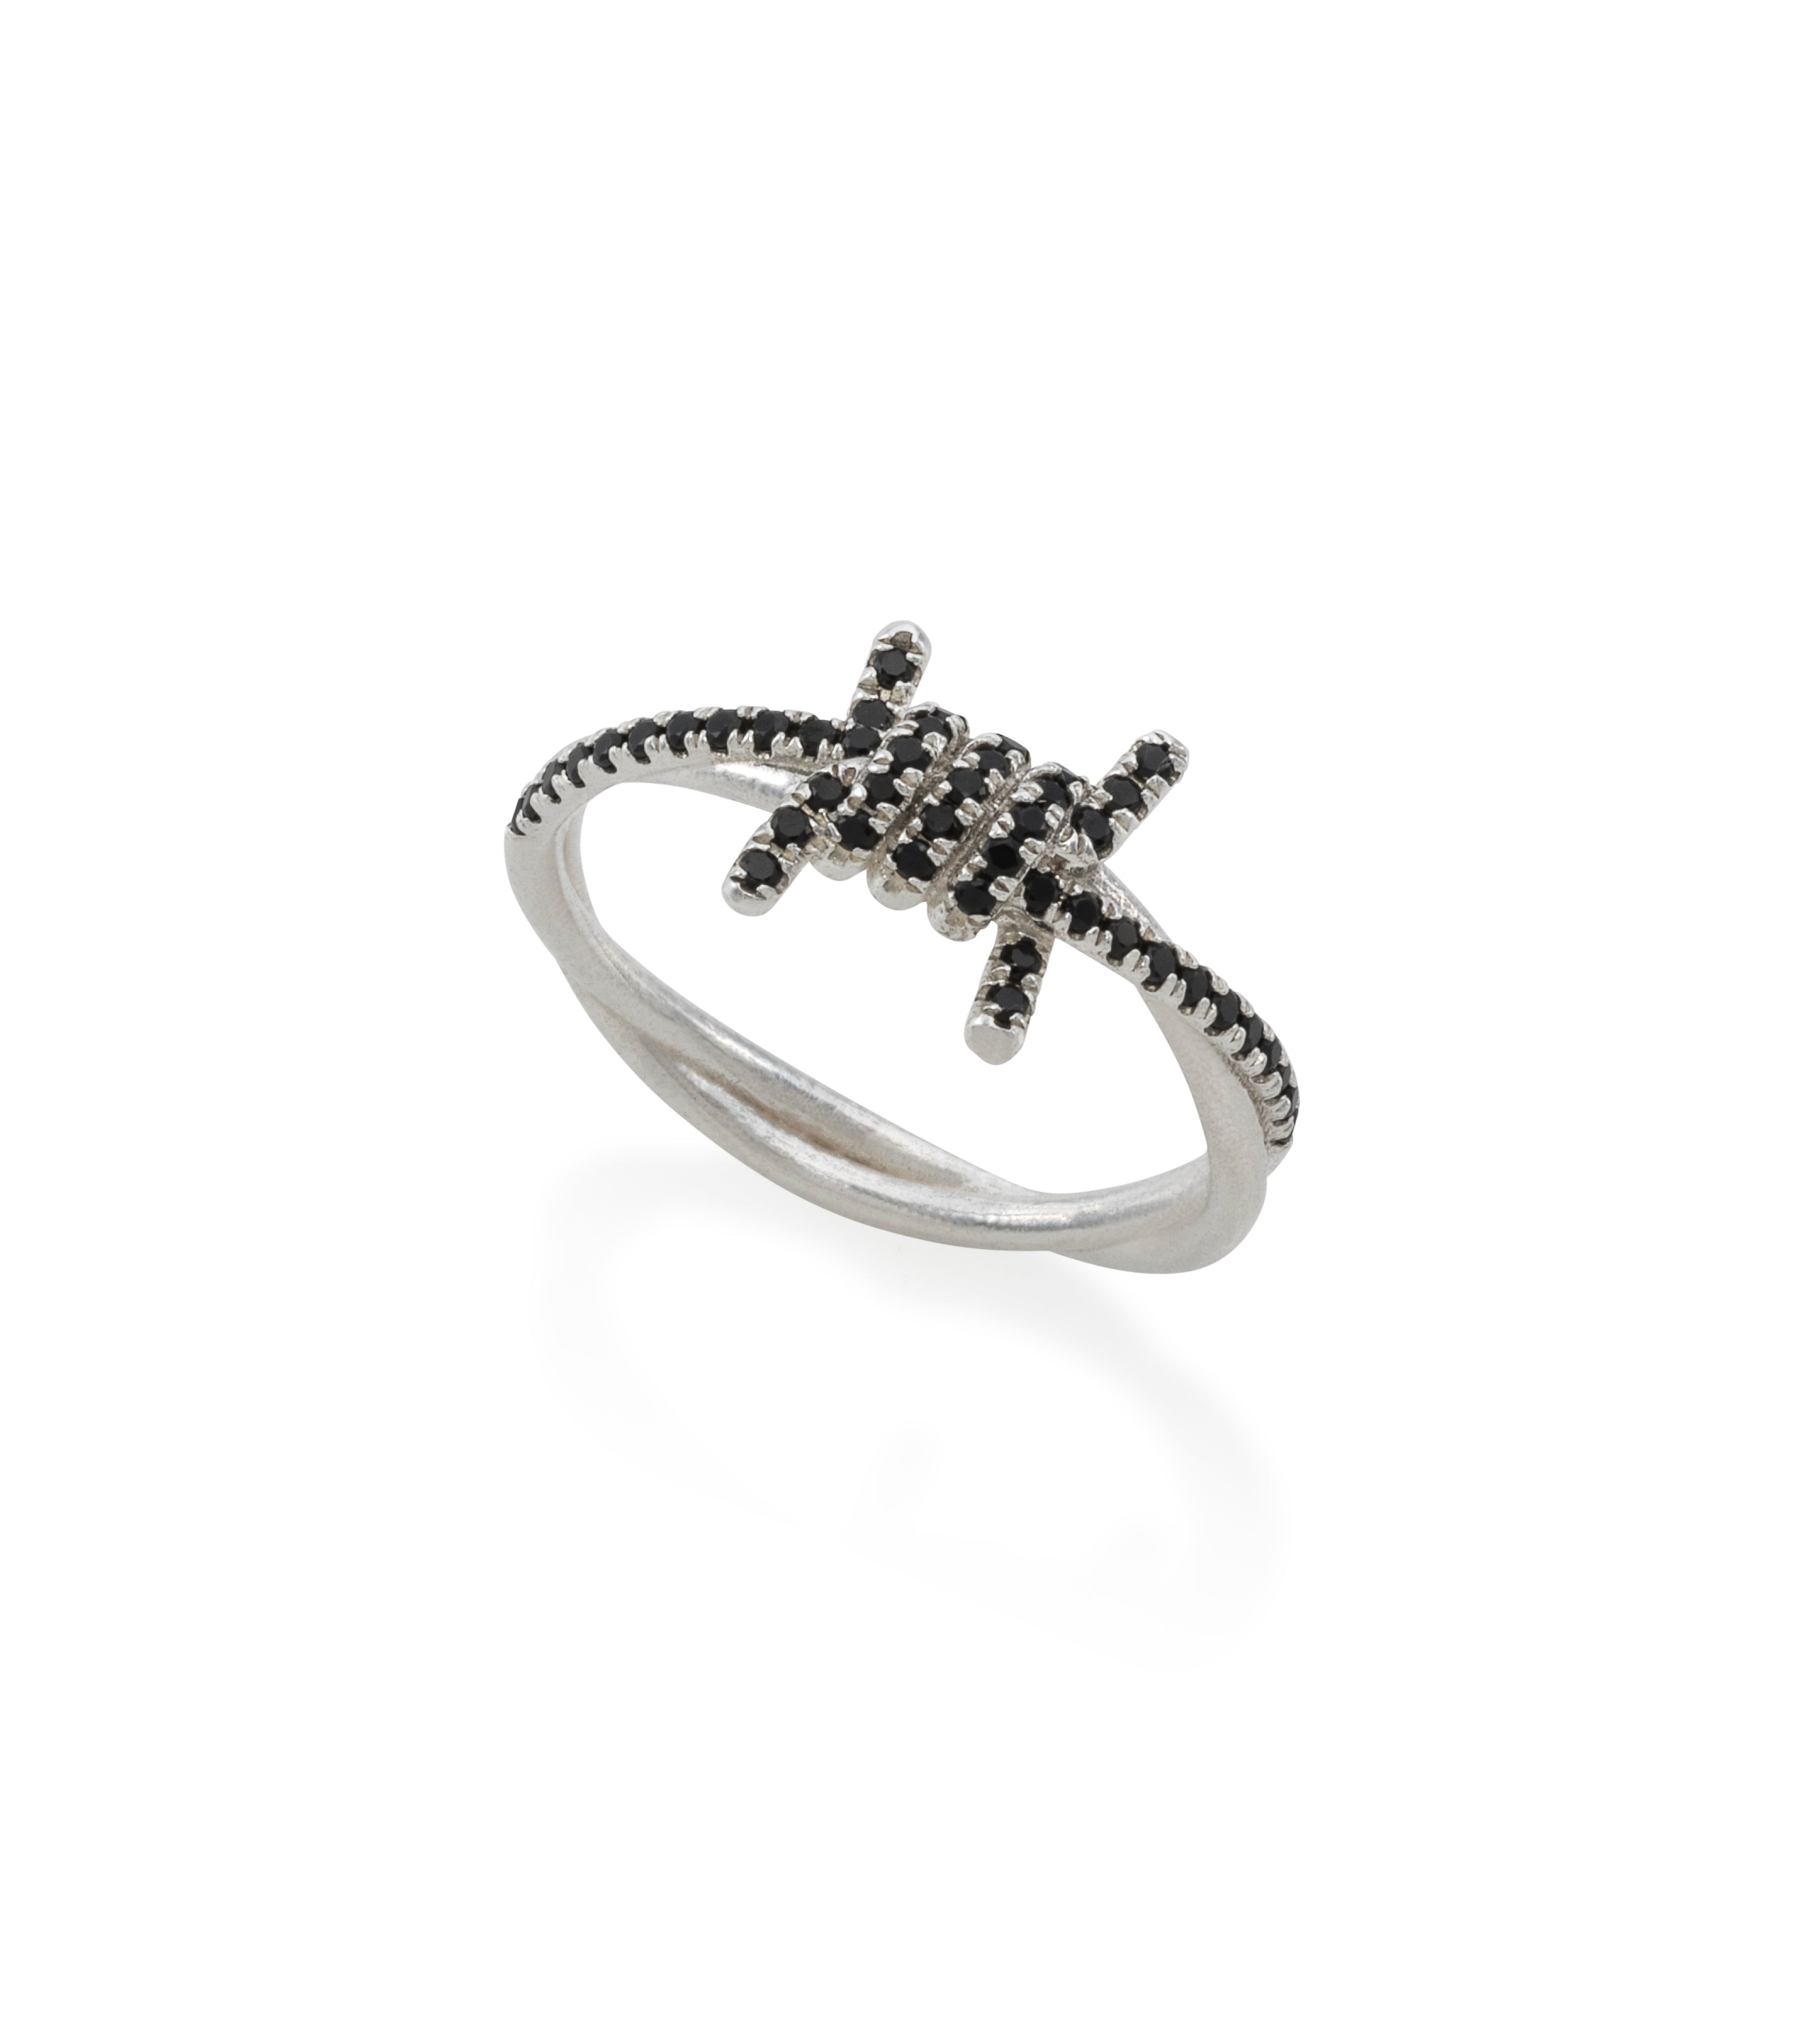 Small silver barbed wire ring with black stones